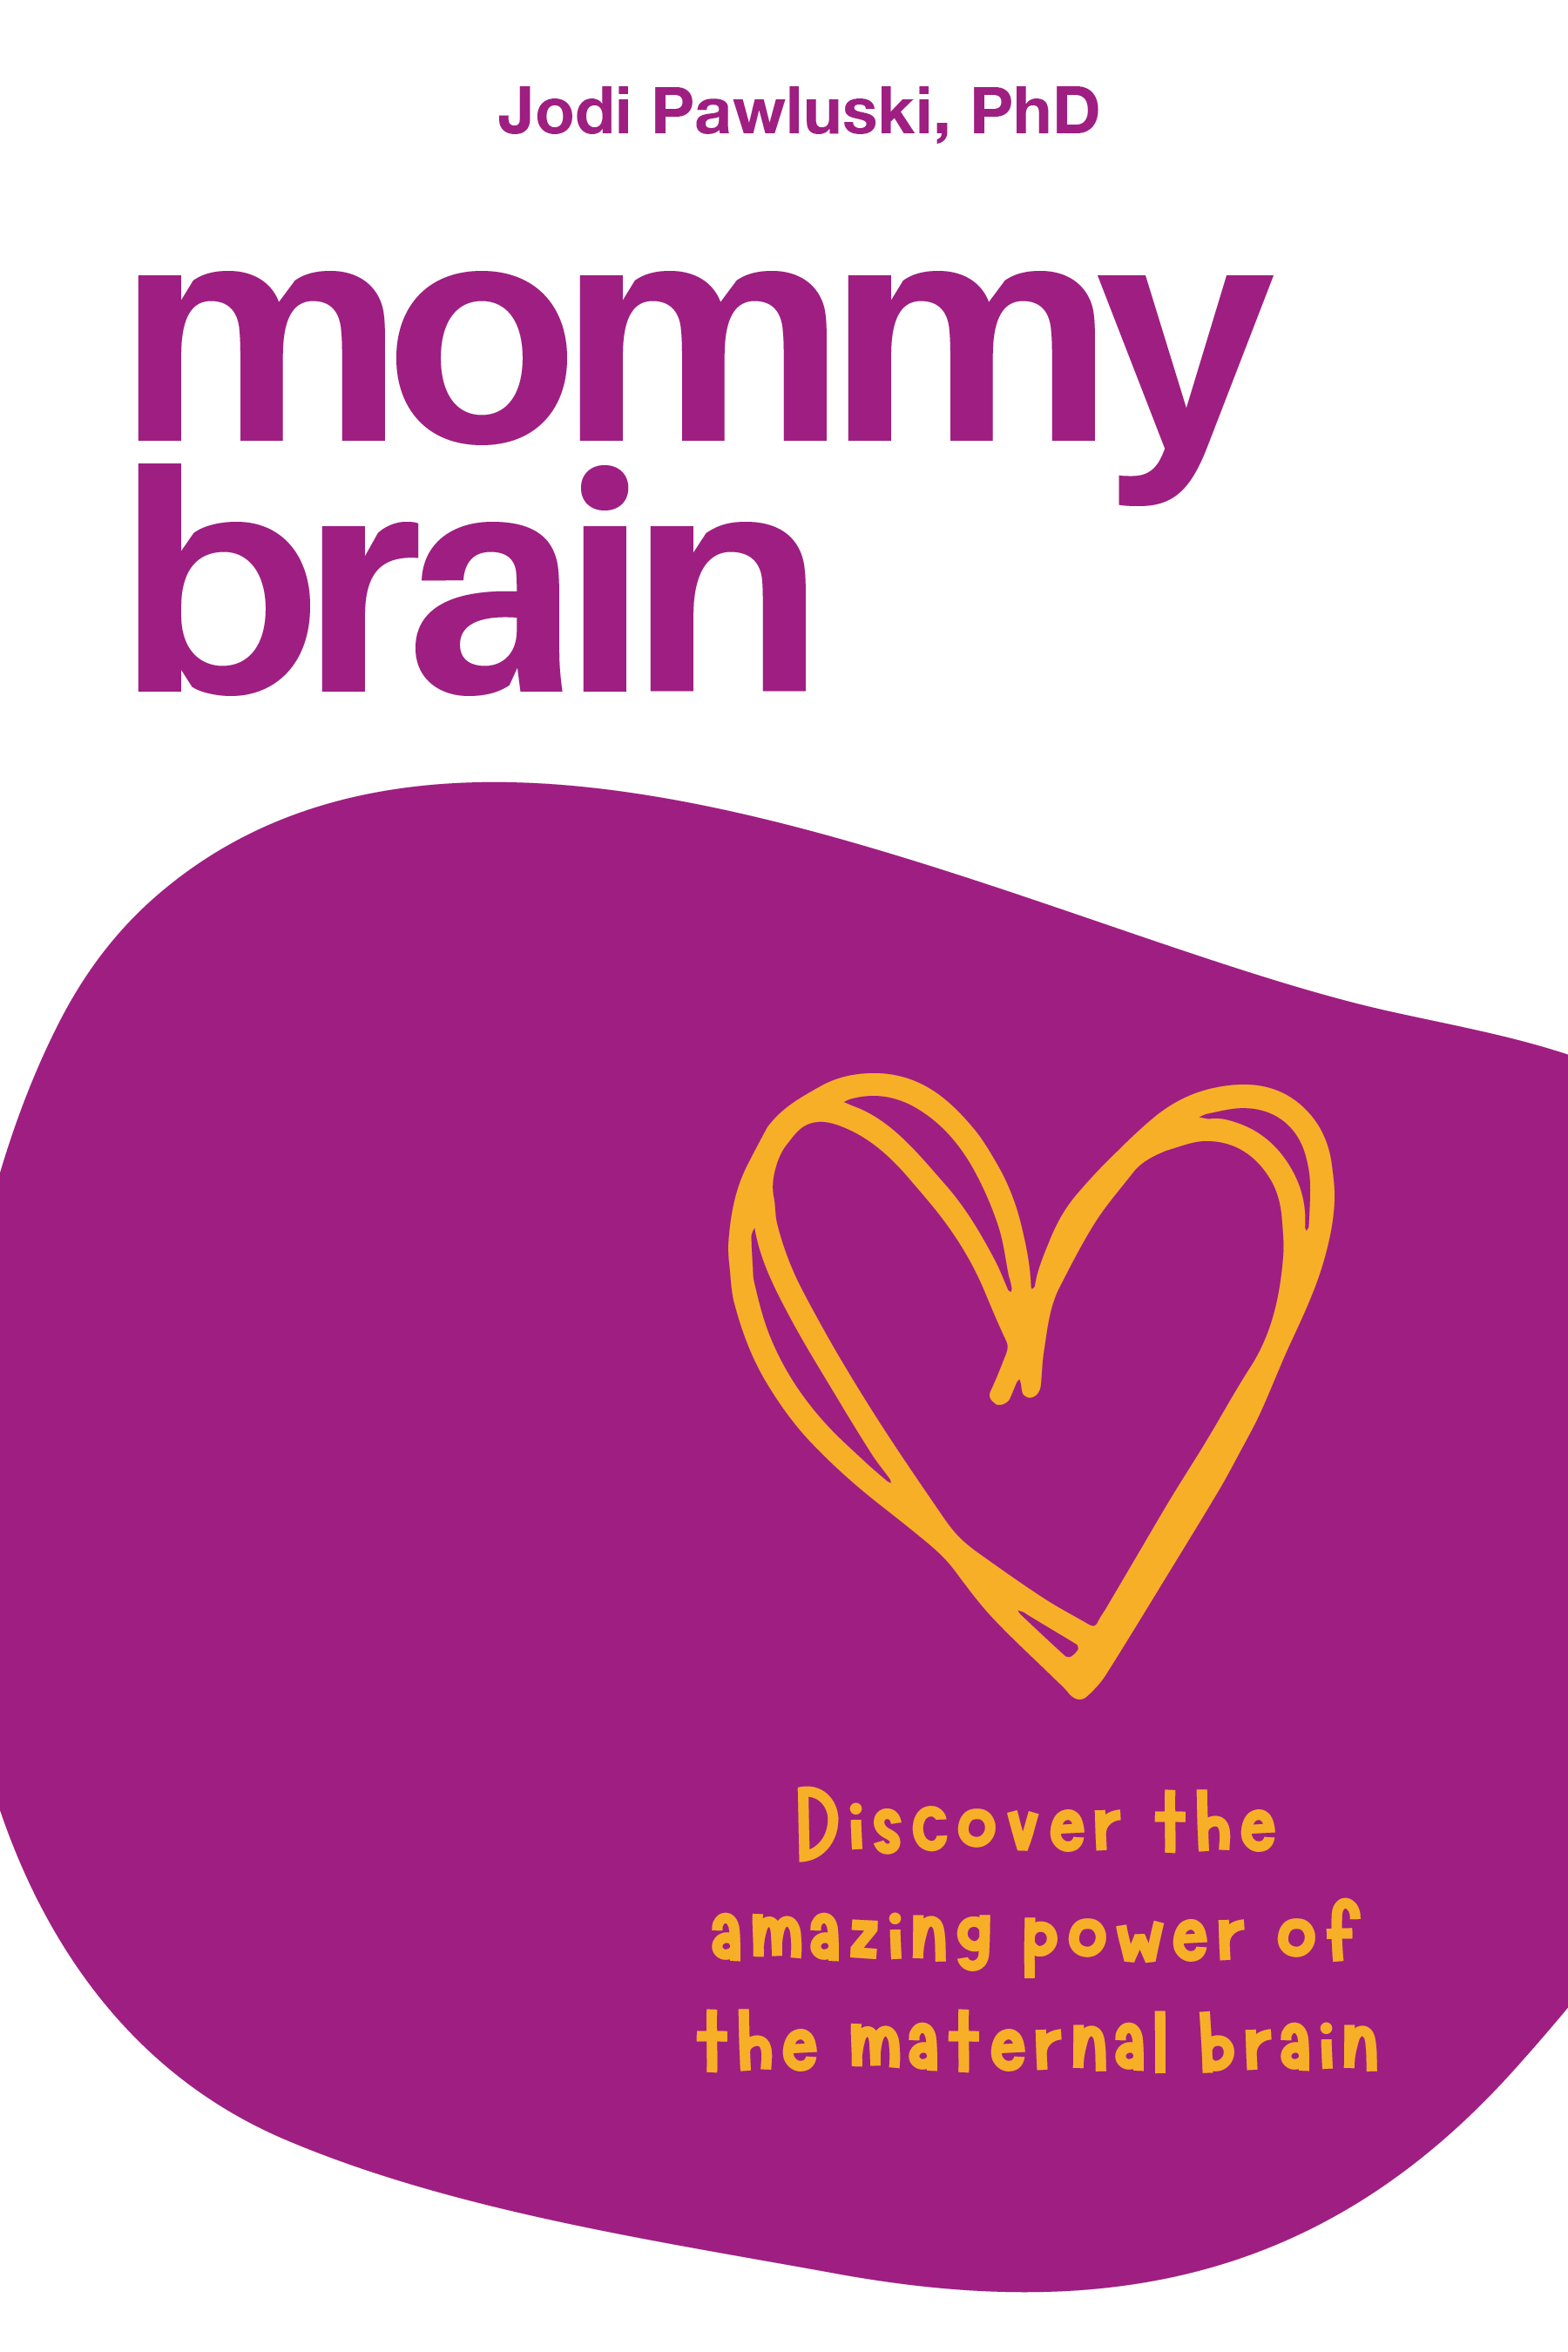 Demeter Press  Mommy Brain : Discover the amazing power of the